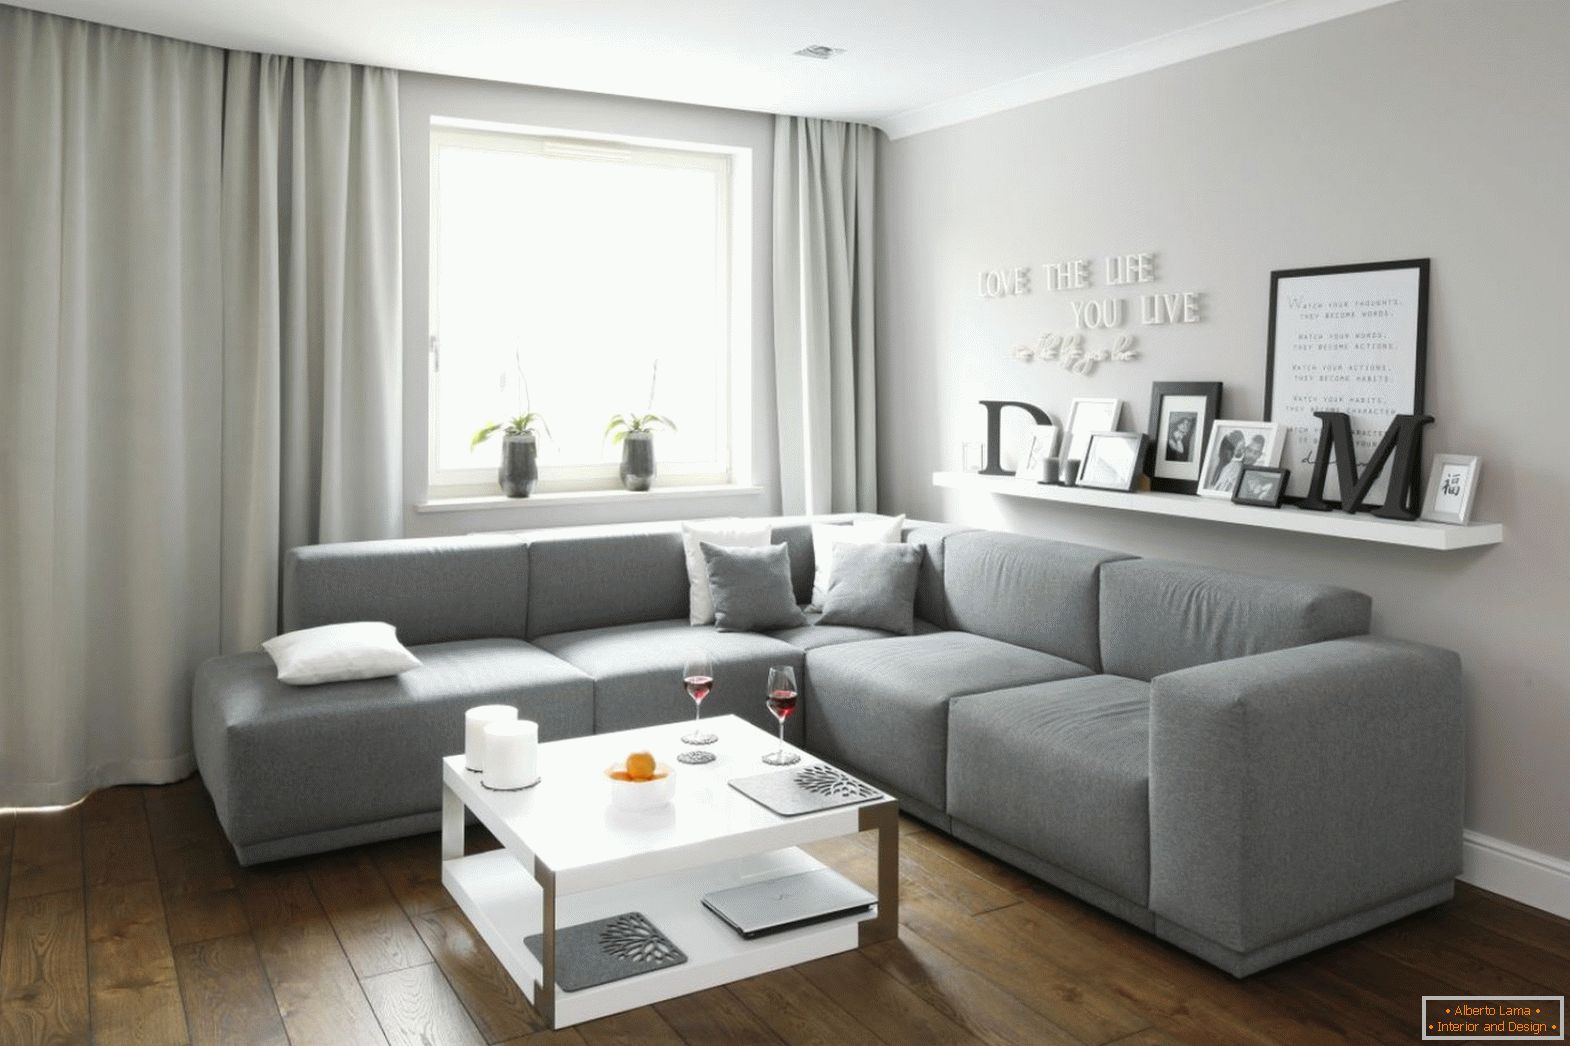 Gray sofa with fabric upholstery in the interior